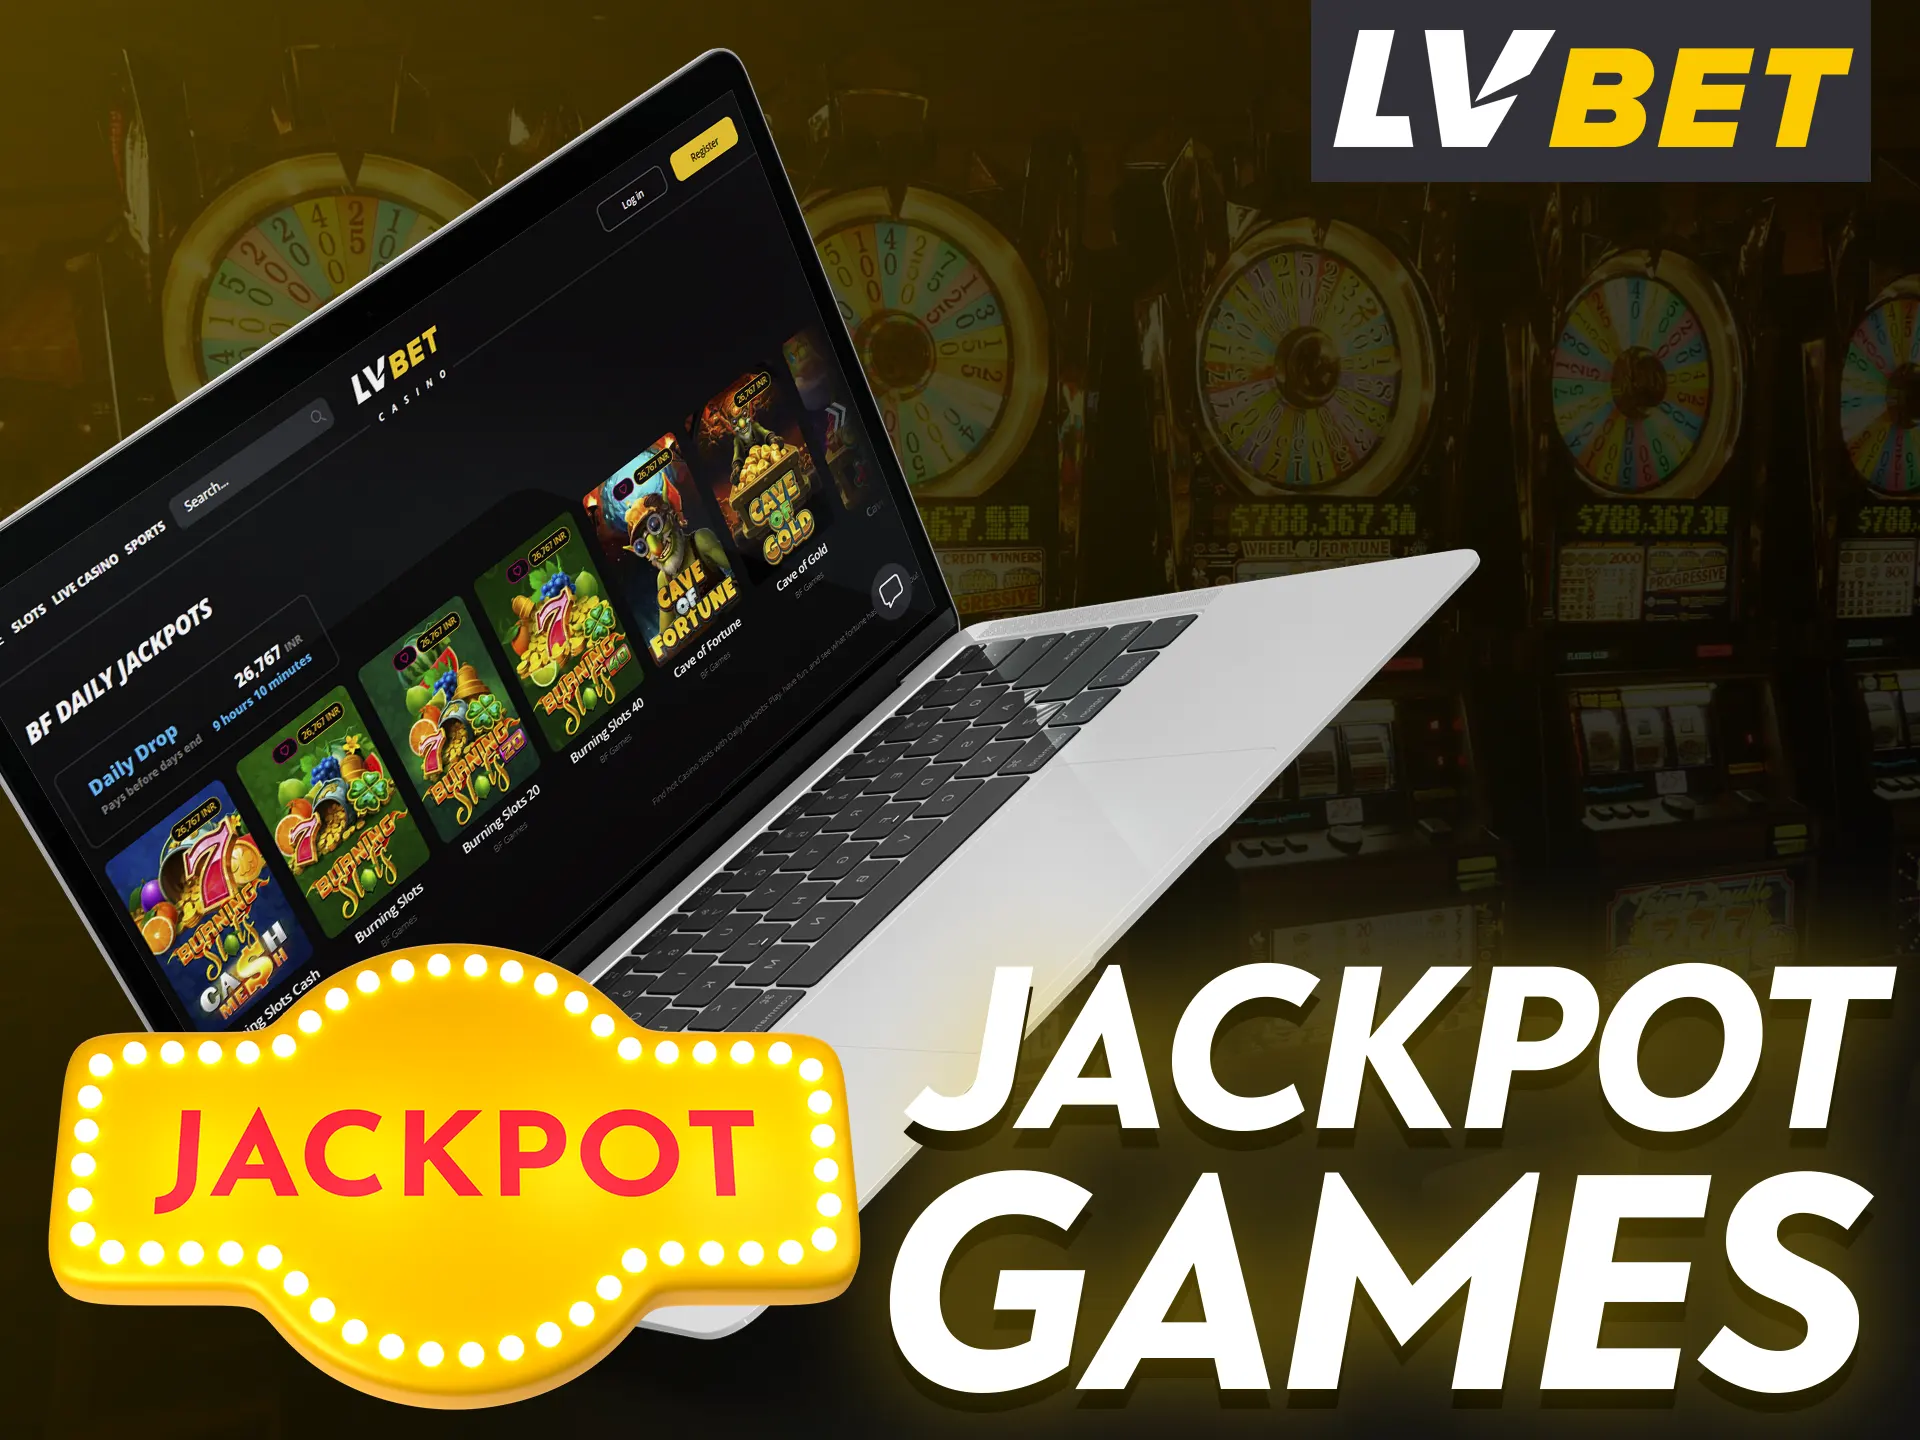 Play and win LV Bet jackpot games.